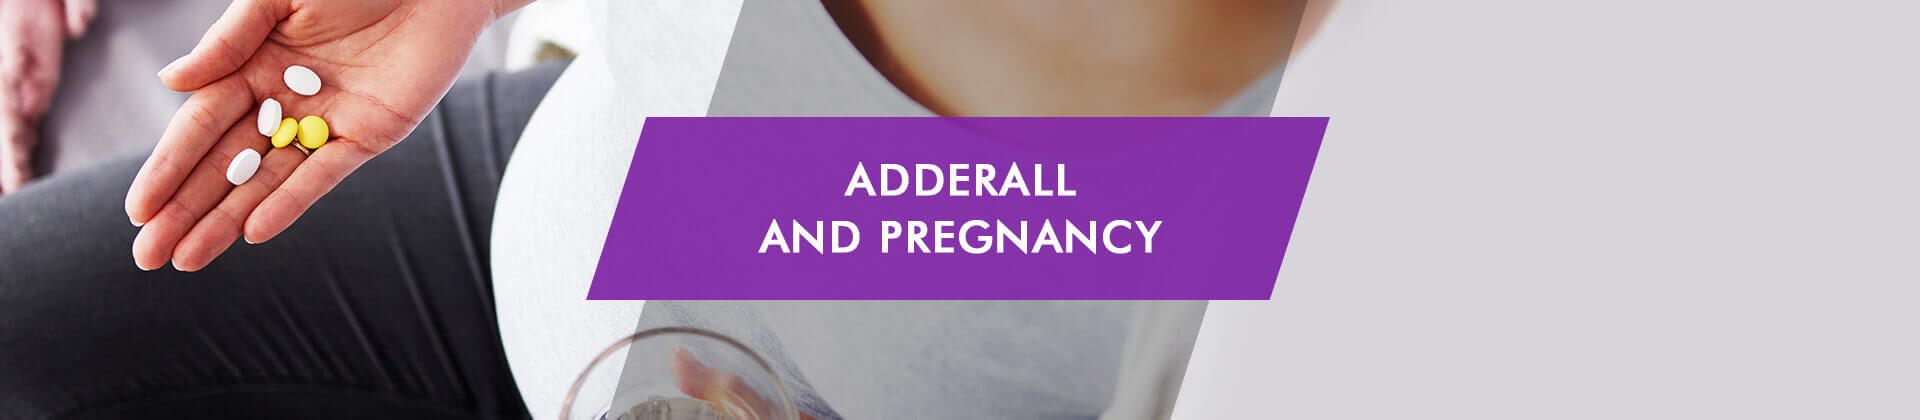 safe for adderall breastfeeding is